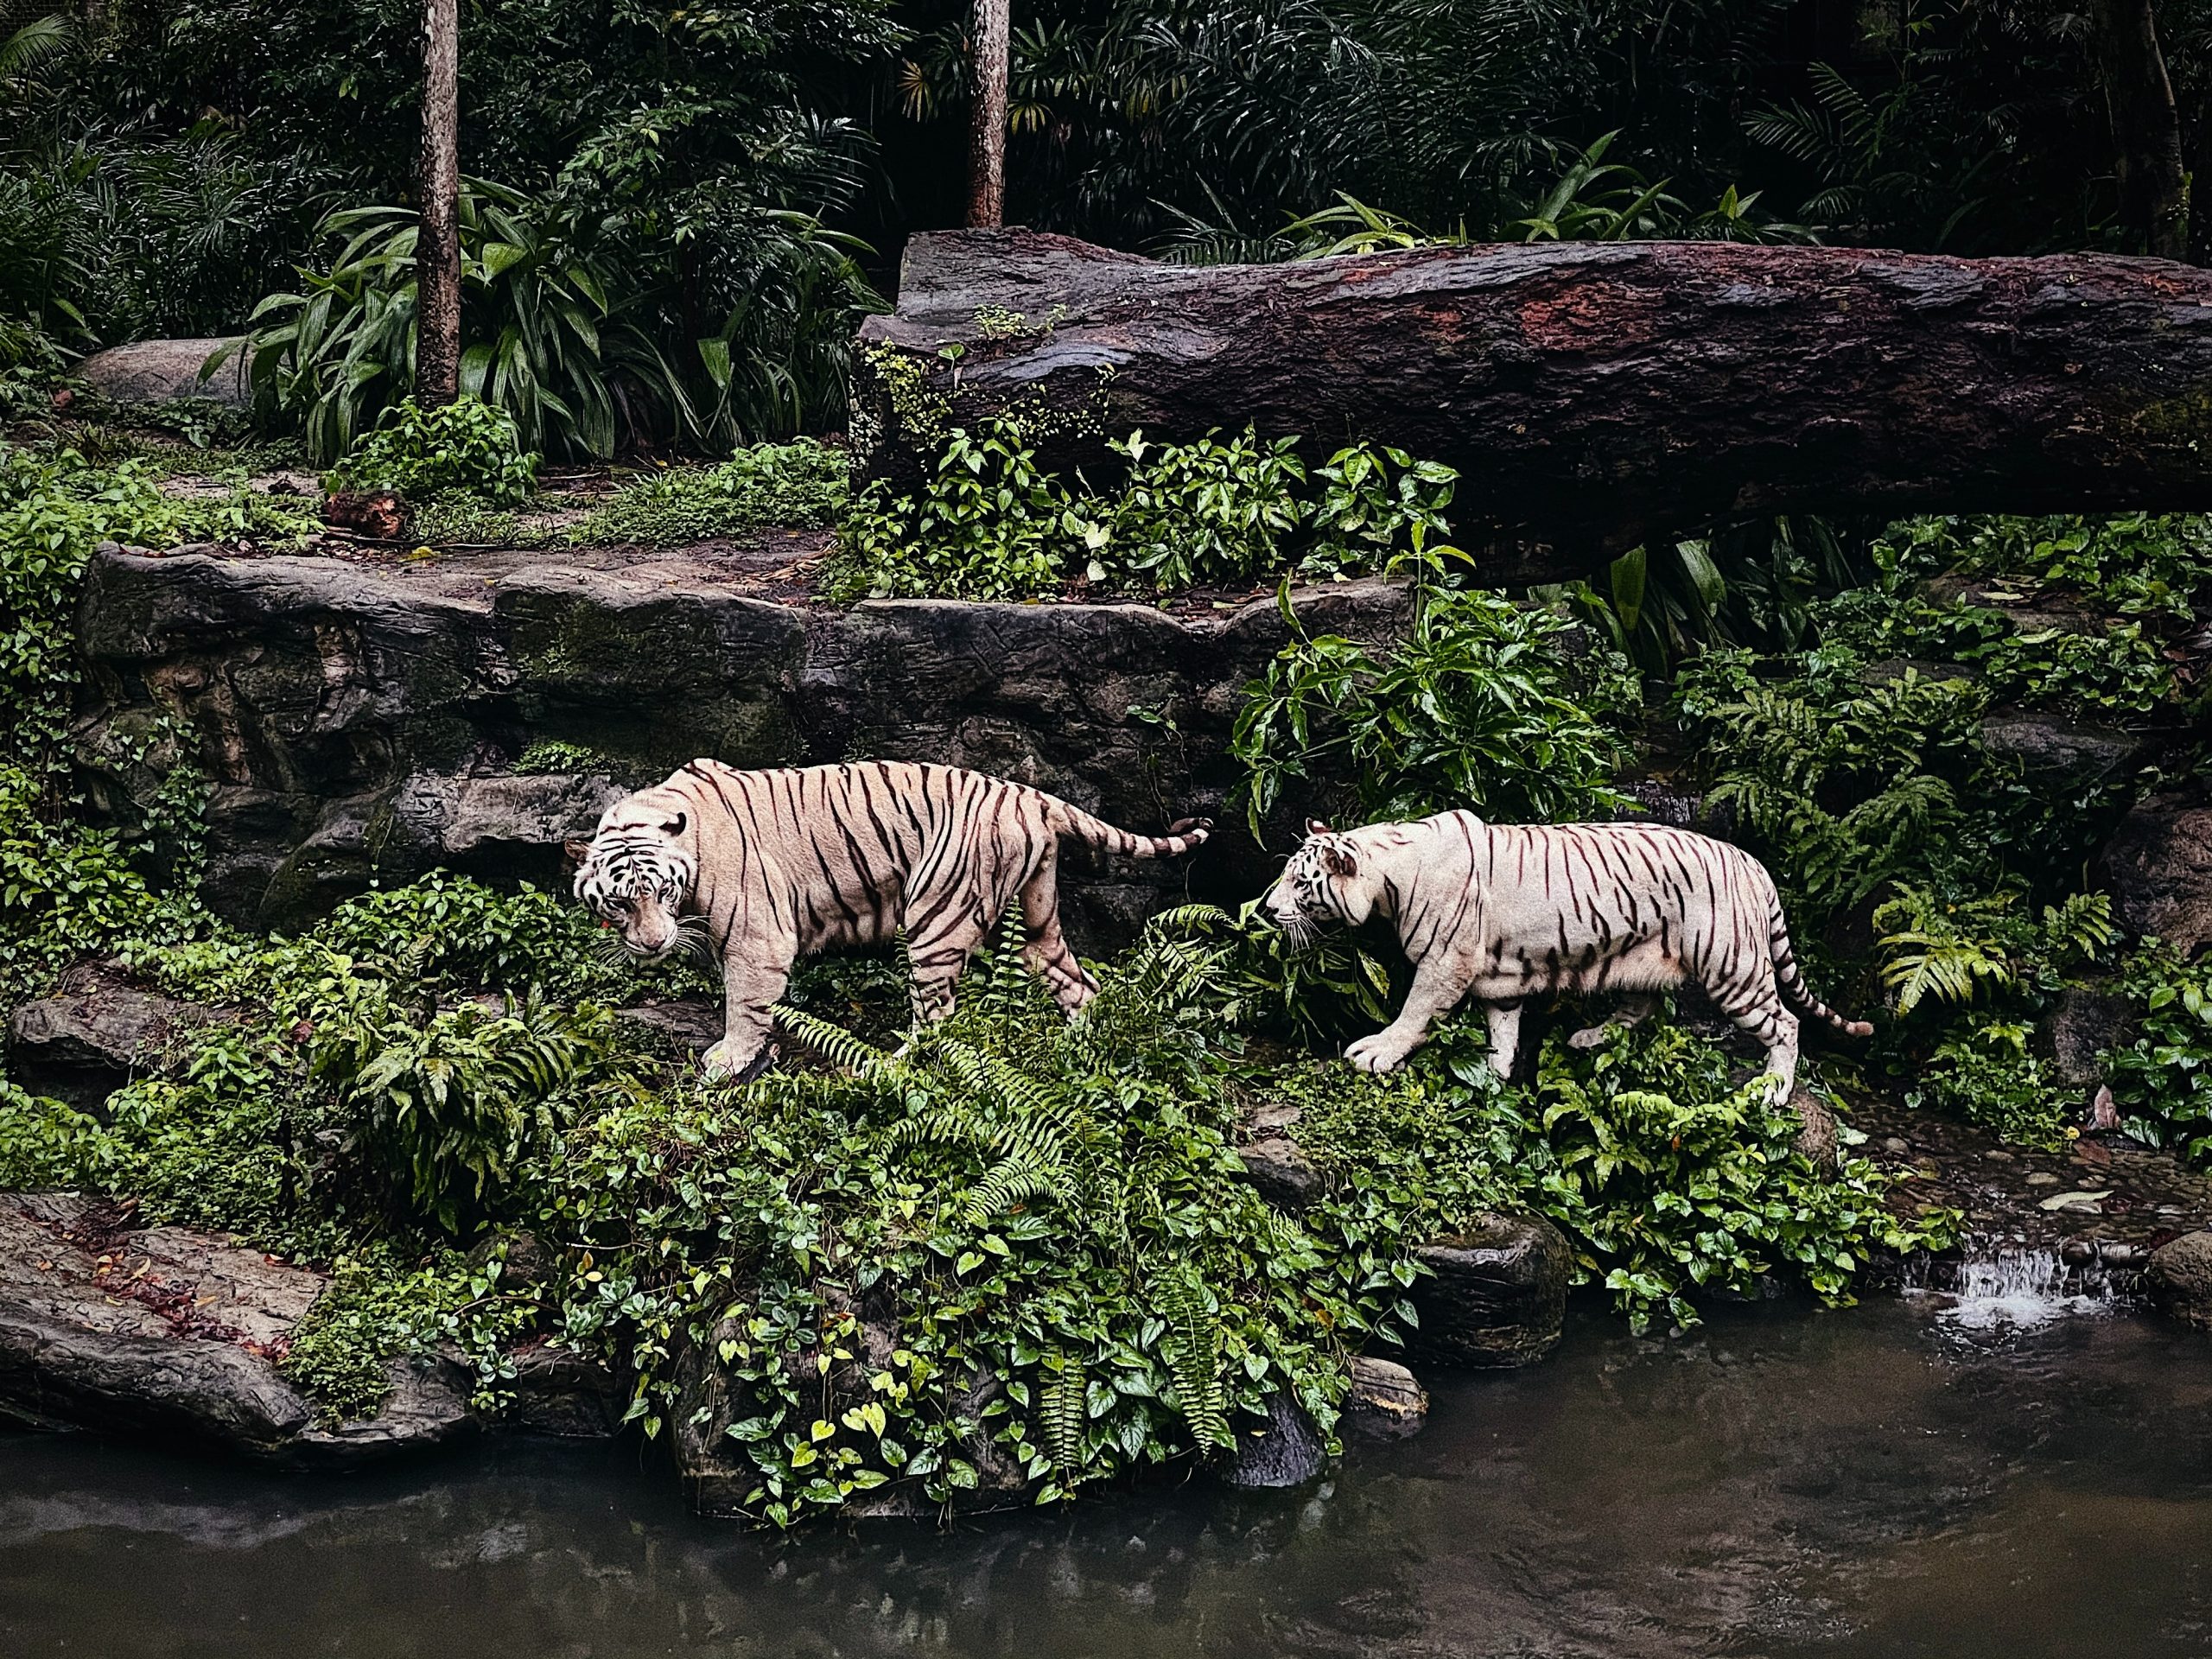 Tigers at the Singapore zoo